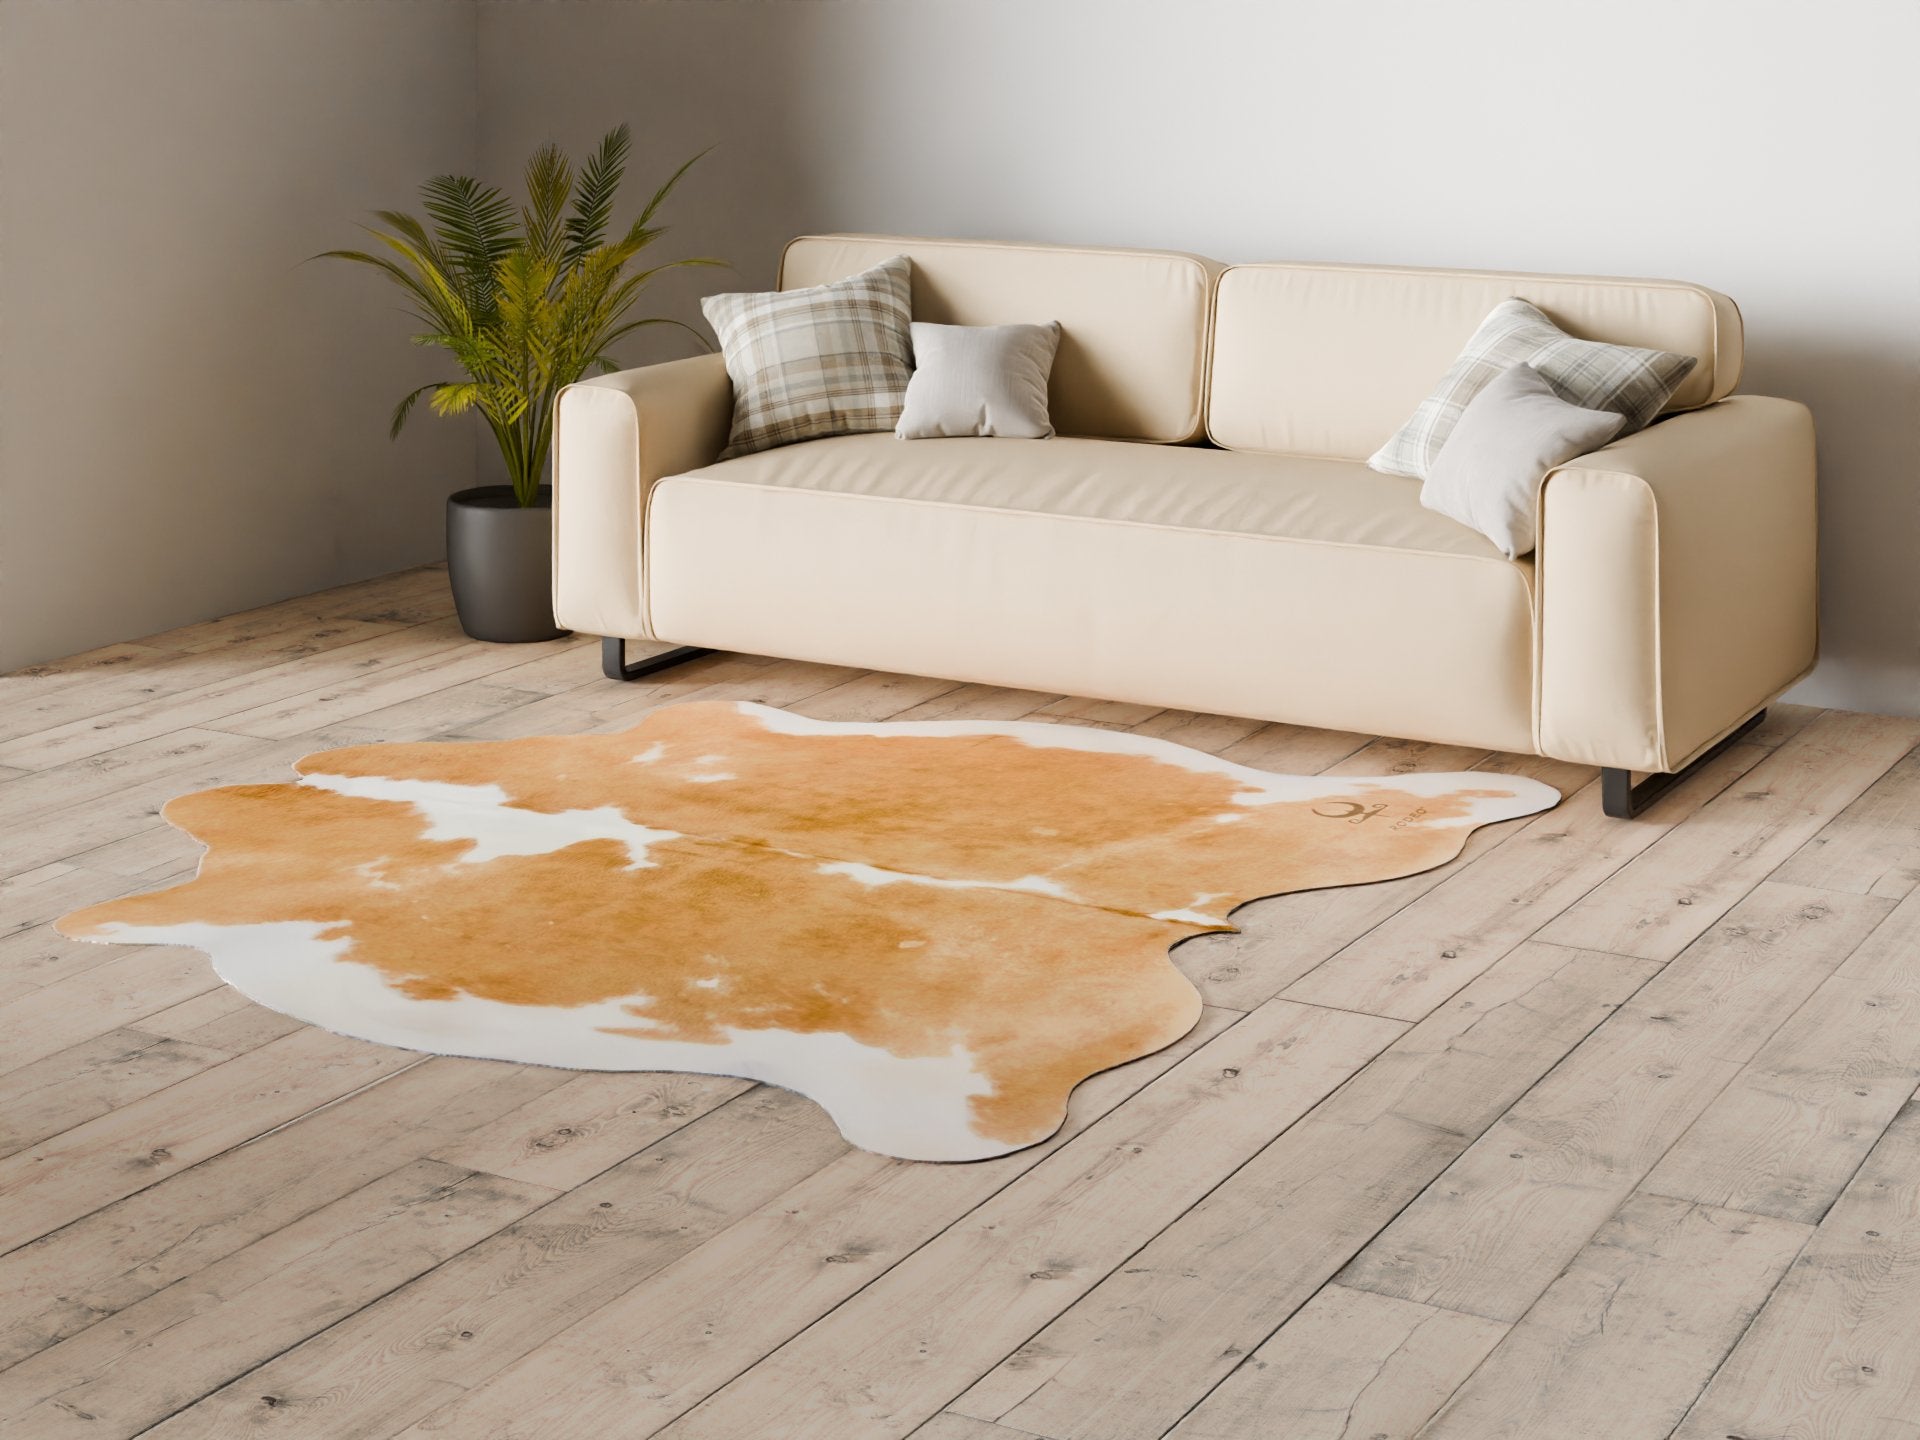 Brown and White Cowhide Rug Size 7x7.4 ft---4668 - Rodeo Cowhide Rugs